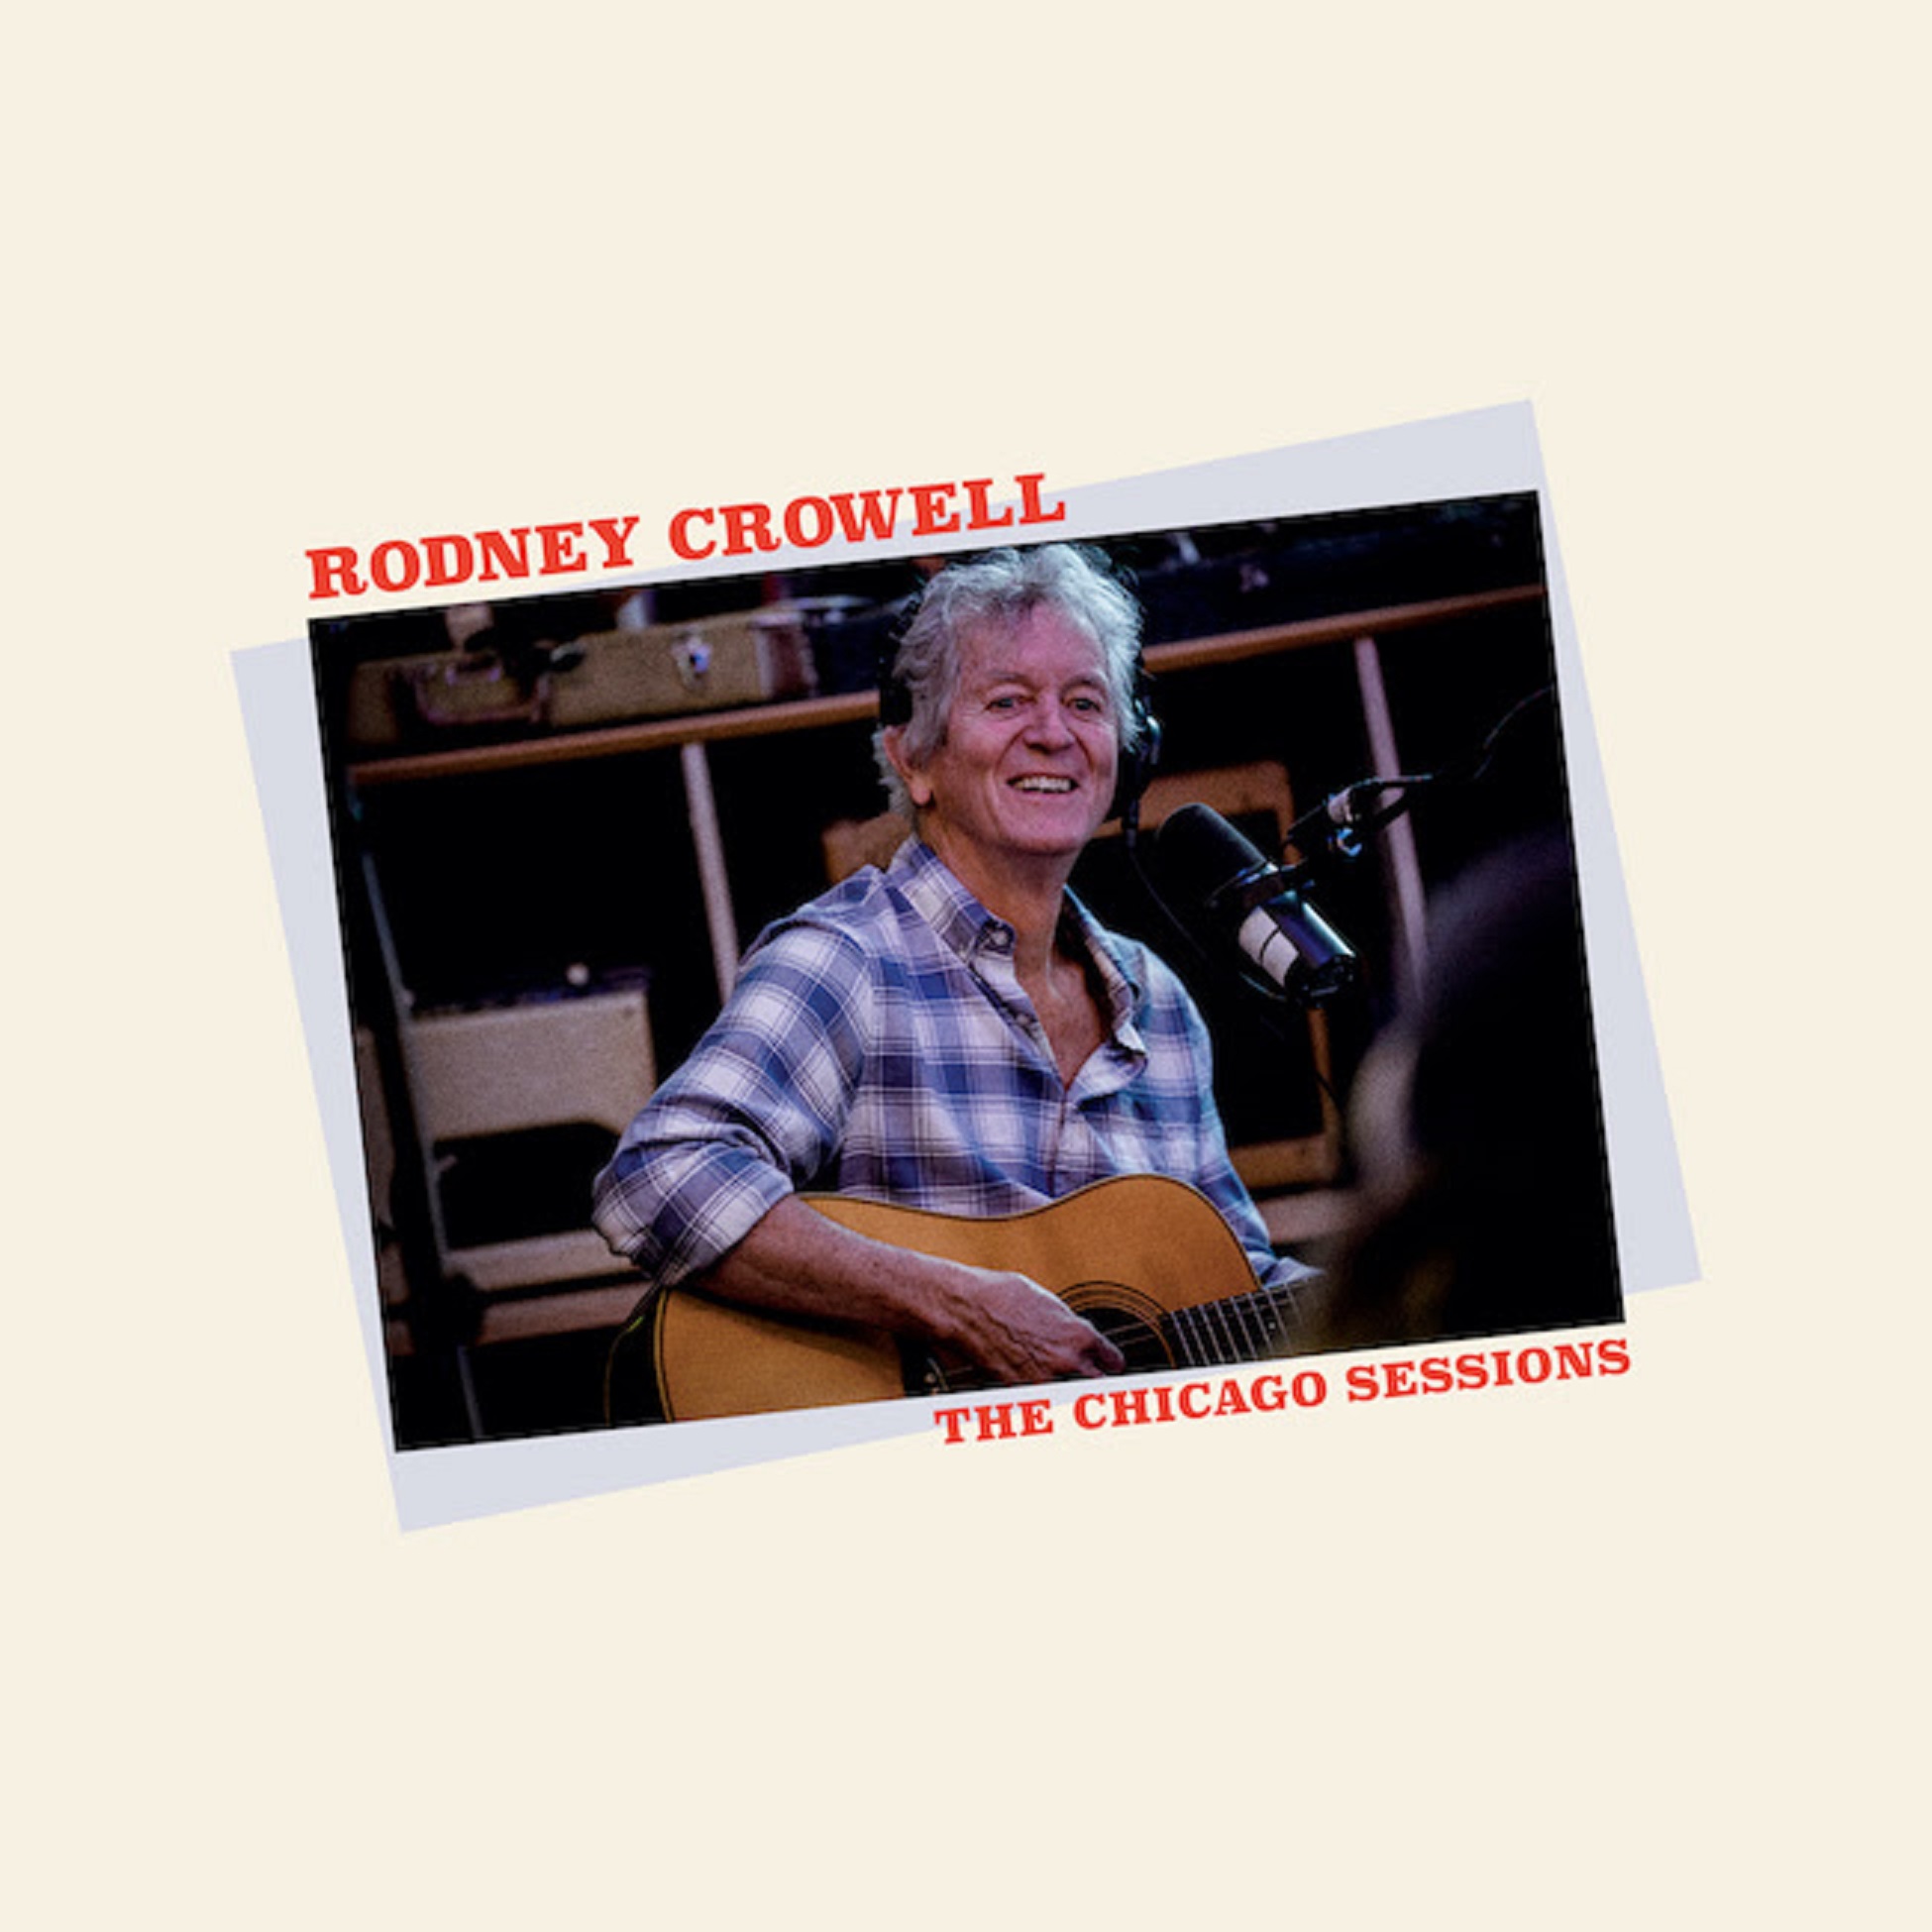 Rodney Crowell's "The Chicago Sessions" - Produced By Jeff Tweedy - Out Now Via New West Records